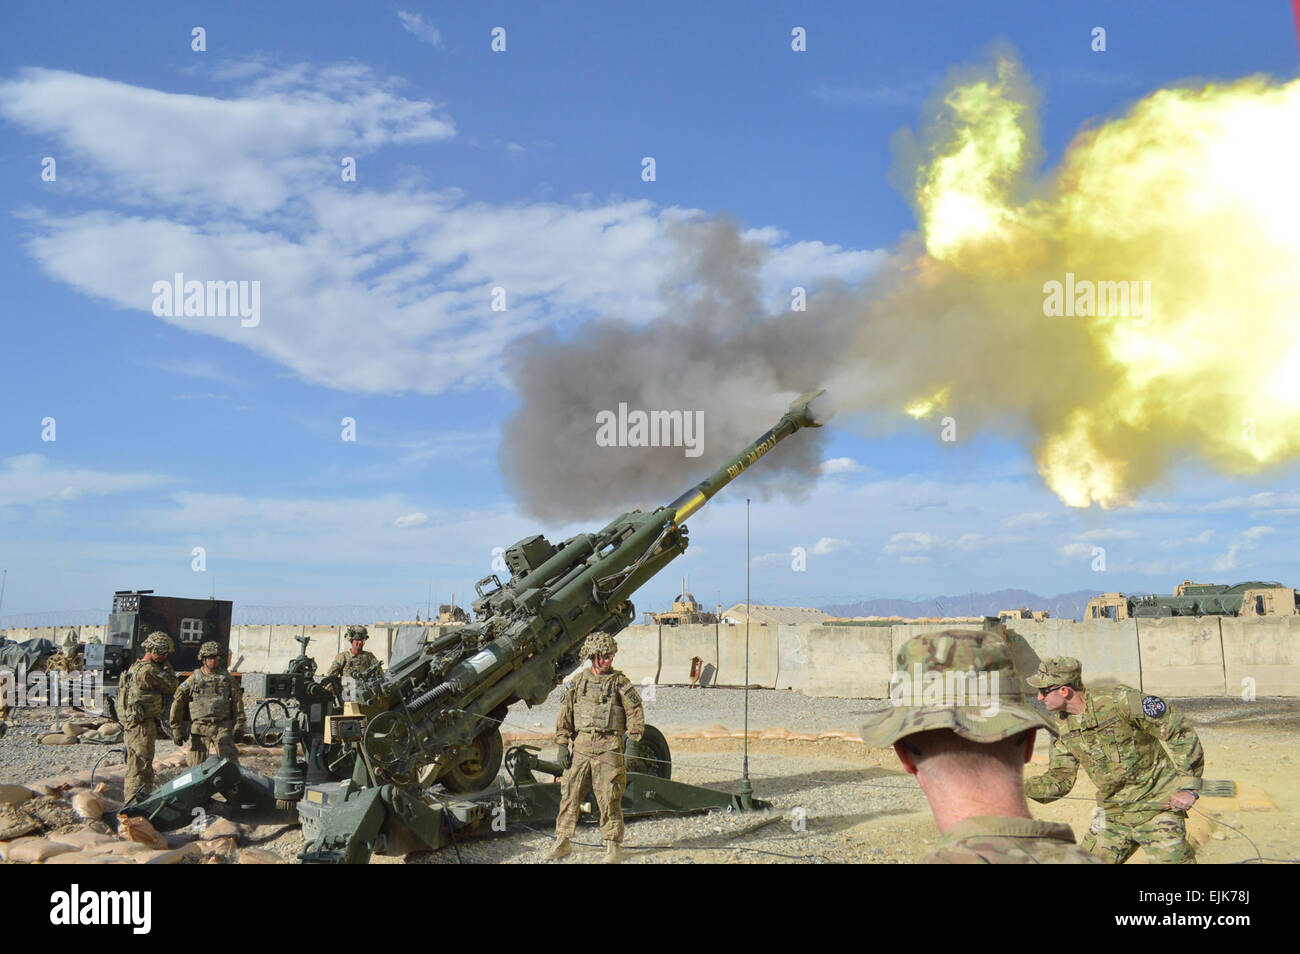 Sgt. Brendan Marrocco's retired brother, Mike Marrocco, fires 155mm howitzer rounds from an M777 with Task Force Blackjack, Bravo battery, 4-25 FA on FOB Shank, Afghanistan. The gentlemen are part of Feherty's Troops First Foundations'  Operation Proper Exit. Operation Proper Exit is for troops that have been injured in battle and provides them the opportunity to make a &quot;proper exit&quot; on their own terms.  Staff Sgt. Nelia Chappell Stock Photo